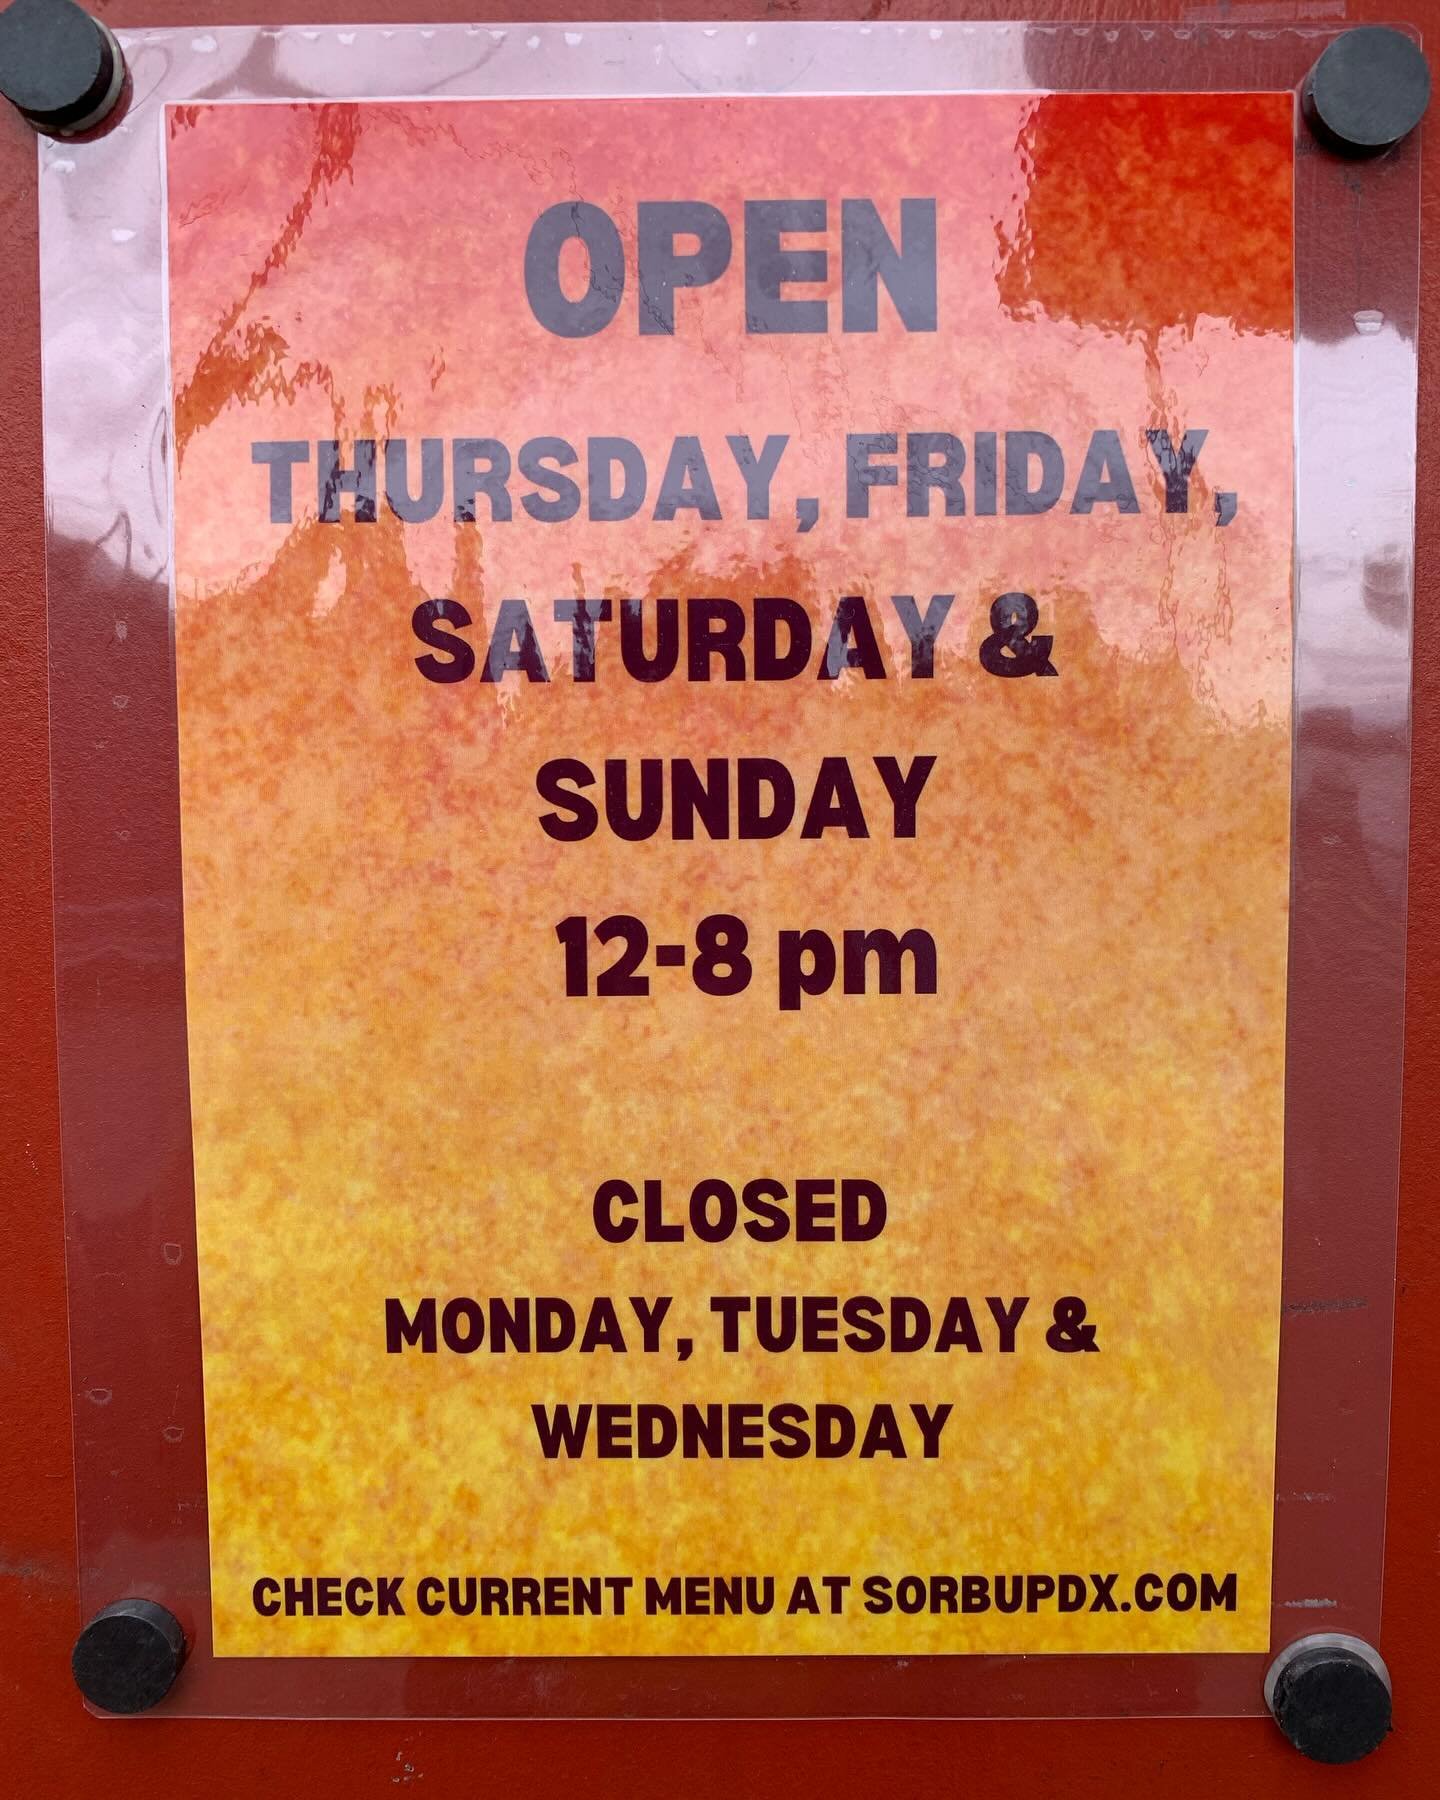 NEW HOURS!!! We will now be open Thursday-Sunday 12-8. That&rsquo;s all. Transmission terminated.